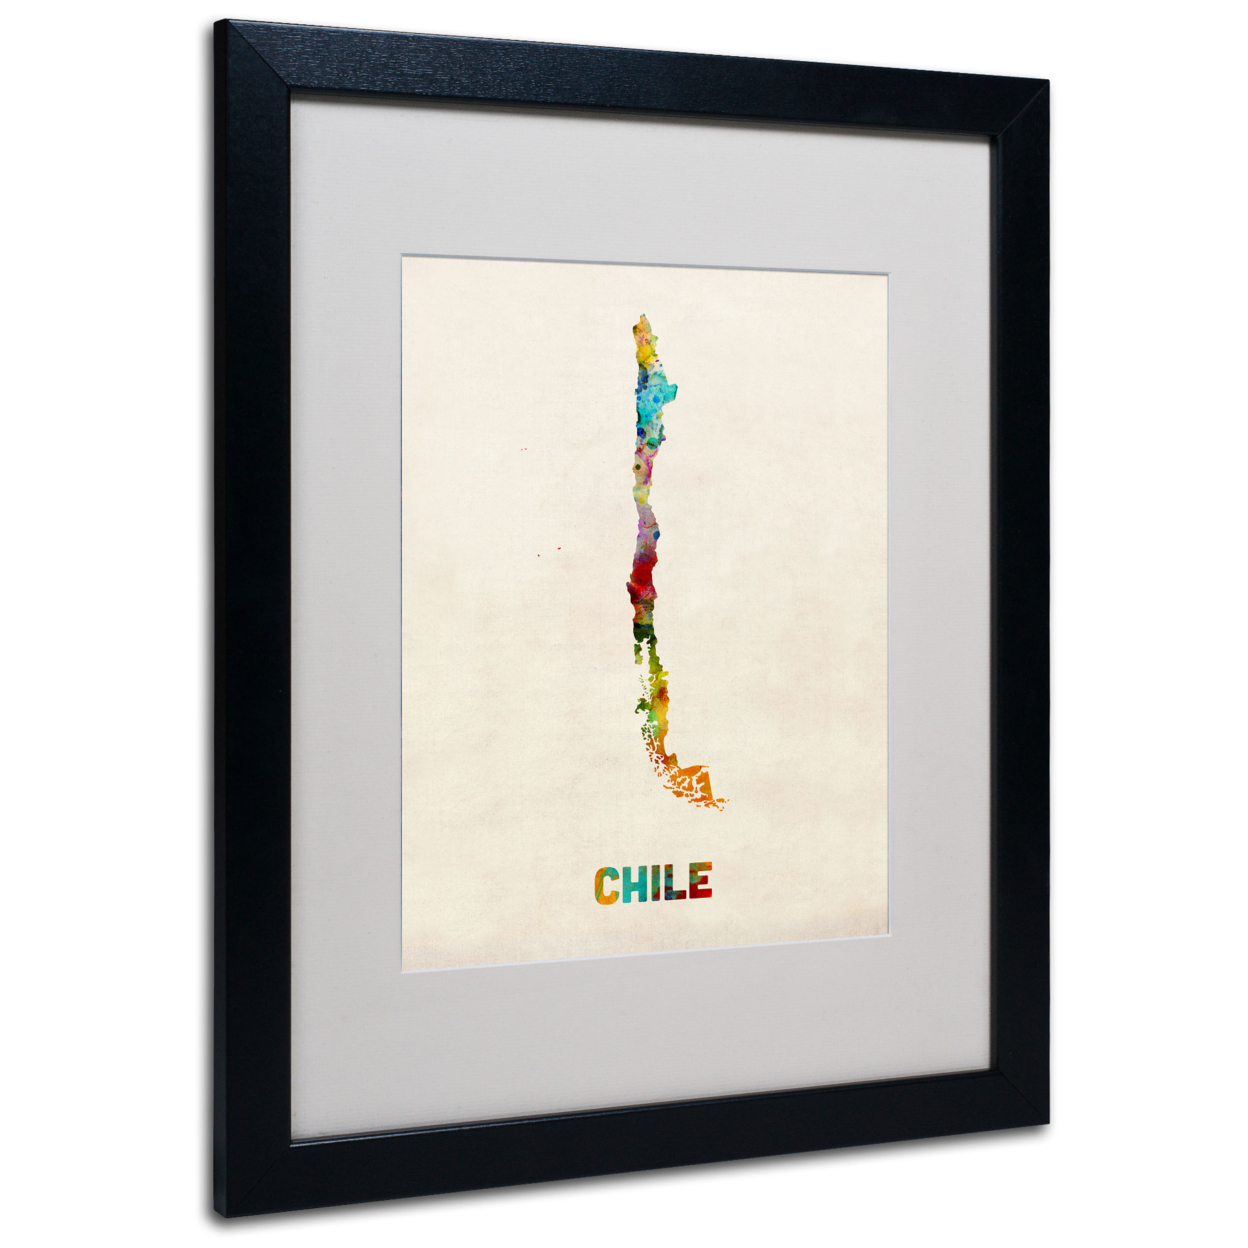 Michael Tompsett 'Chile Watercolor Map' Black Wooden Framed Art 18 X 22 Inches